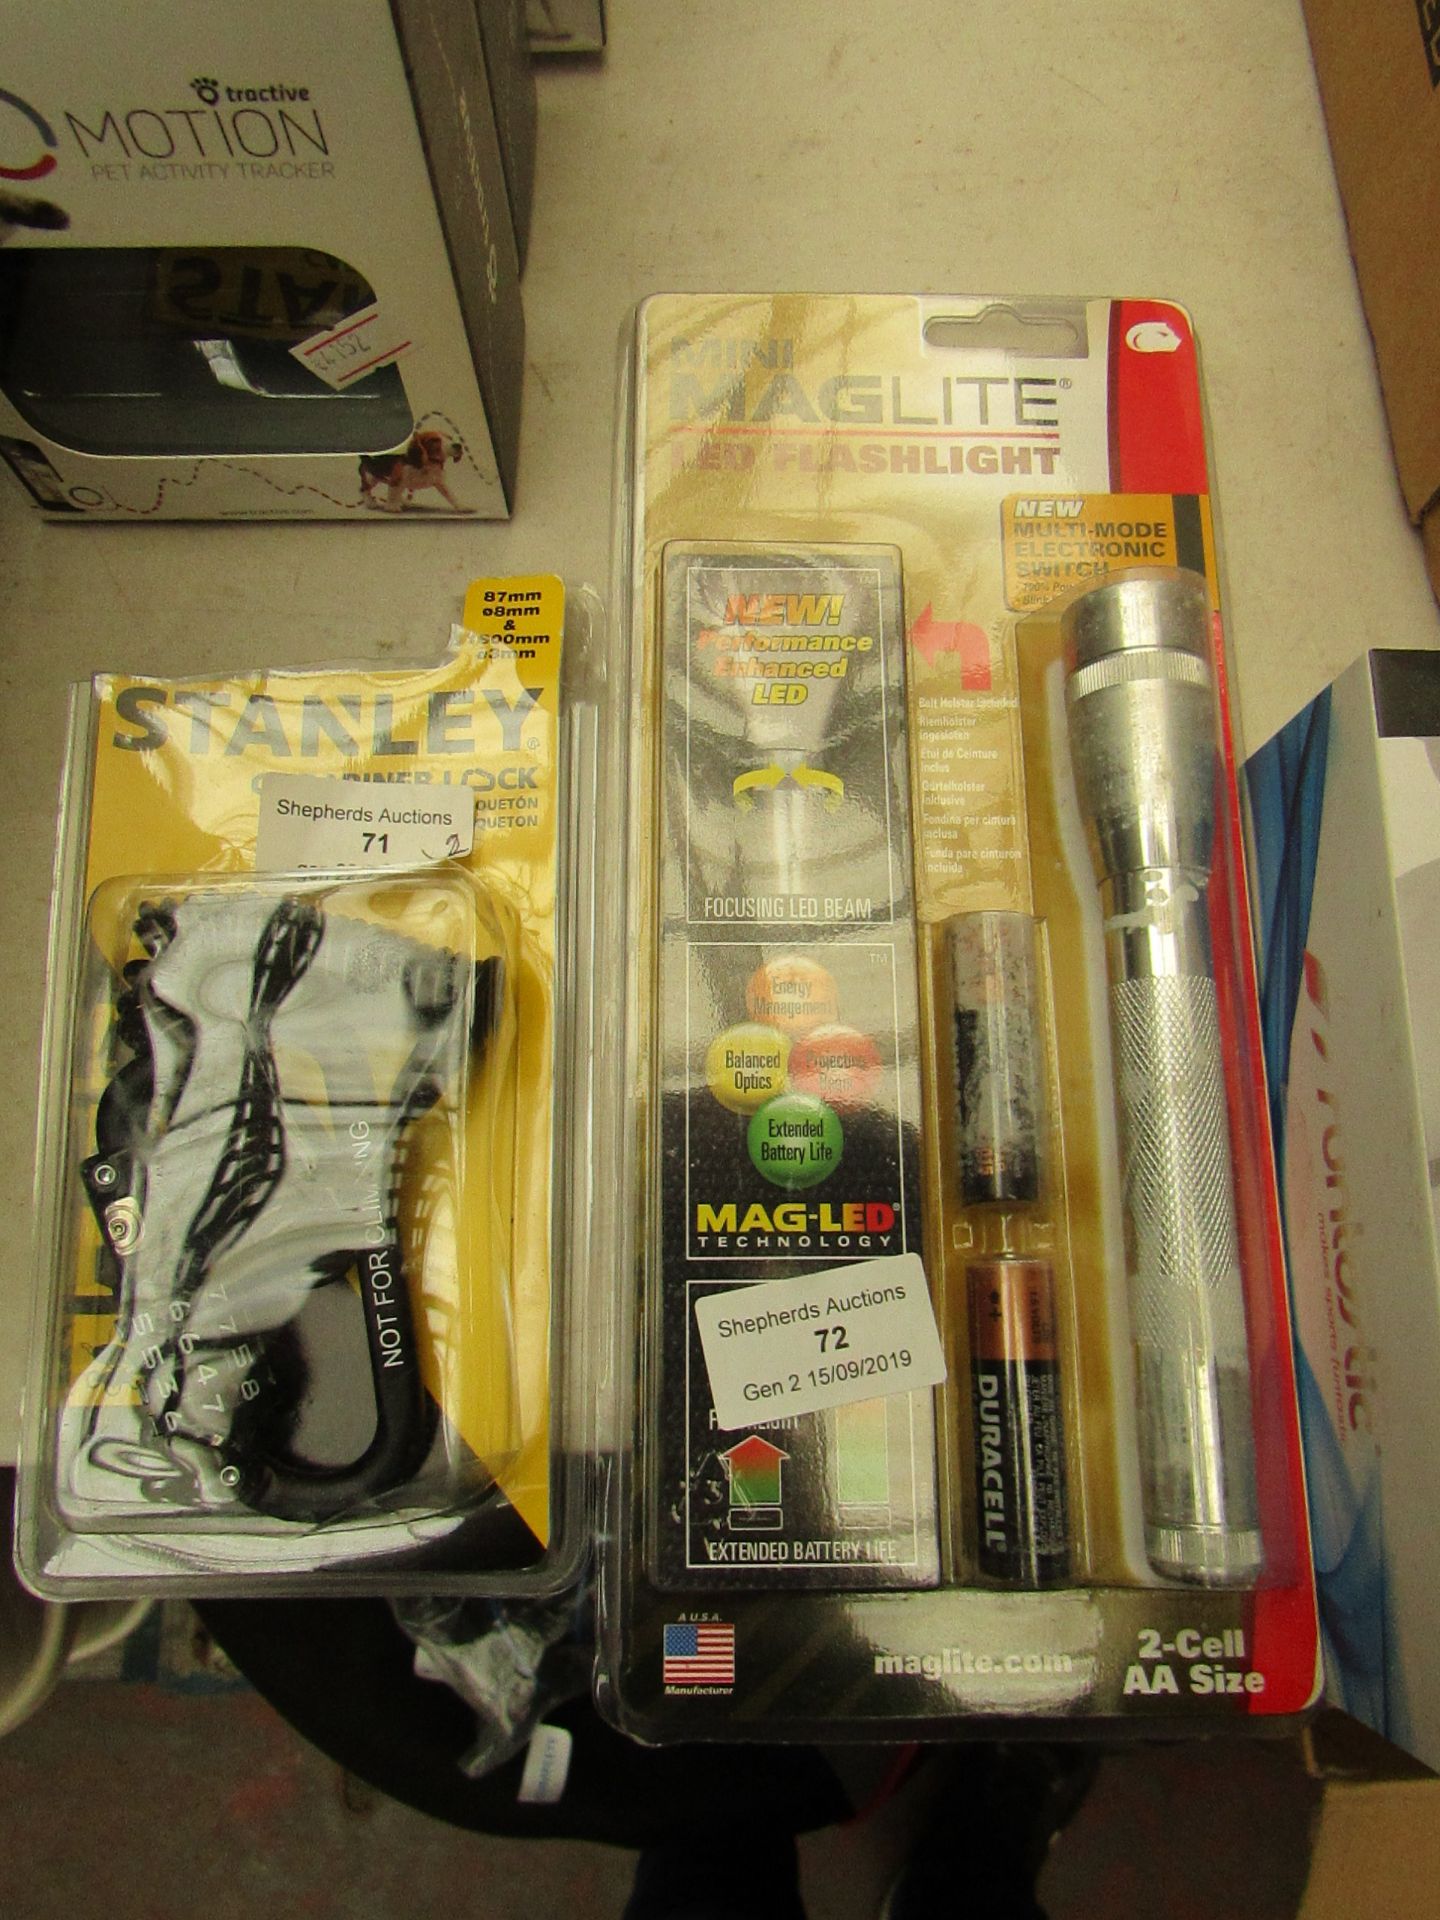 2 x Items being 1 x Mini Maglite LED Flashlight and 1 x Stanley Carabinery Lock, Both Unchecked